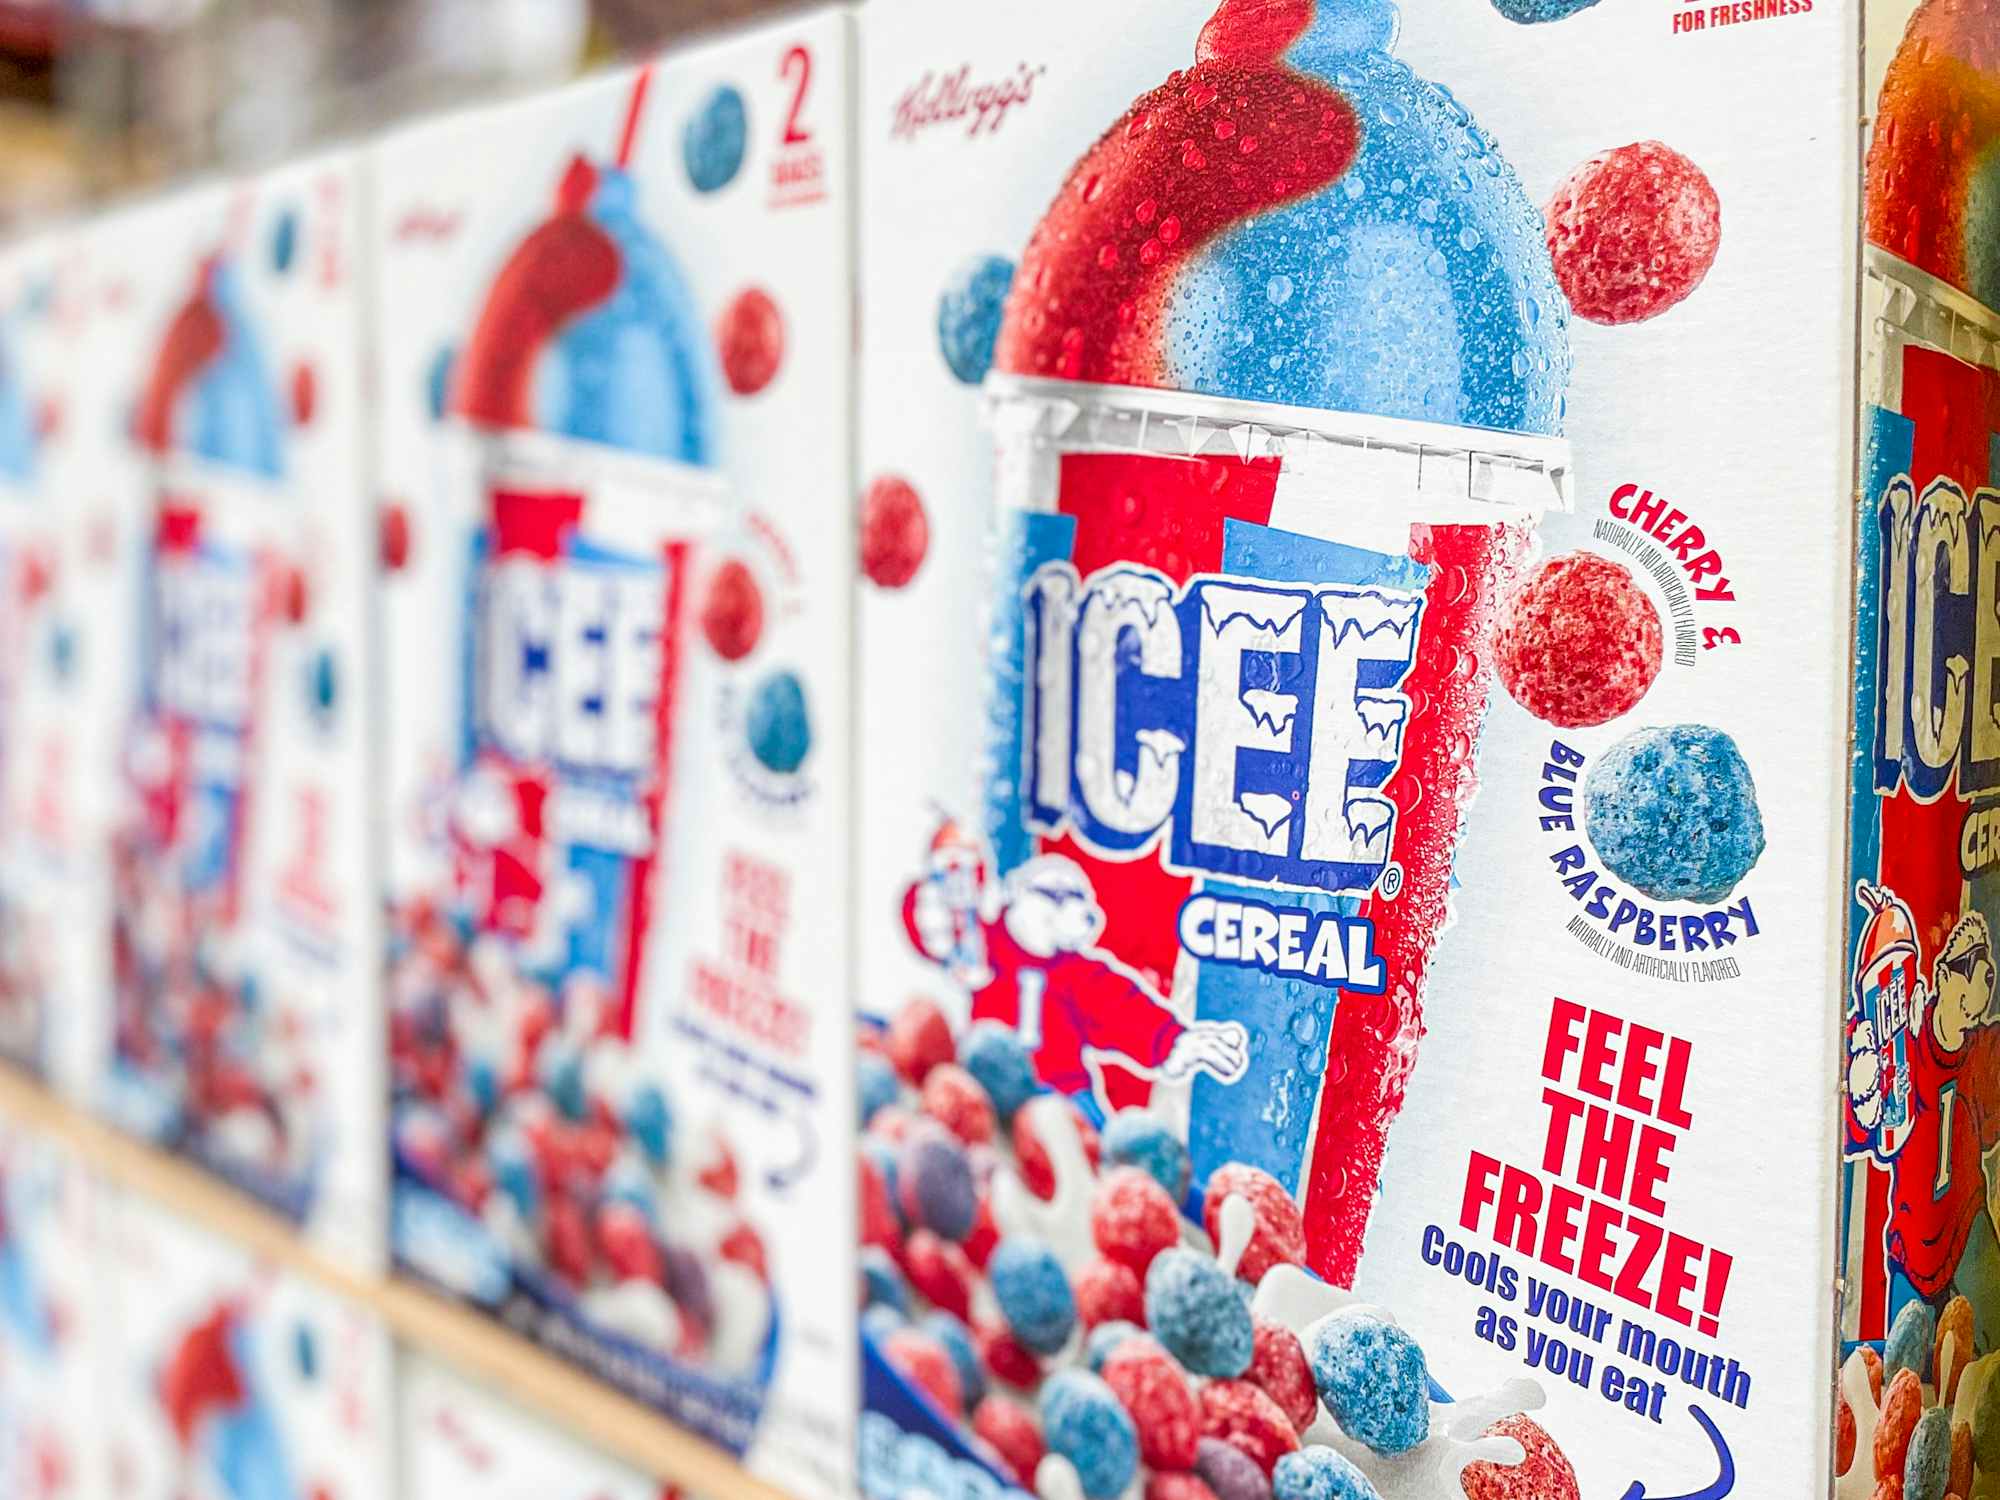 Boxes of ICEE cereal stocked at Sam's Club